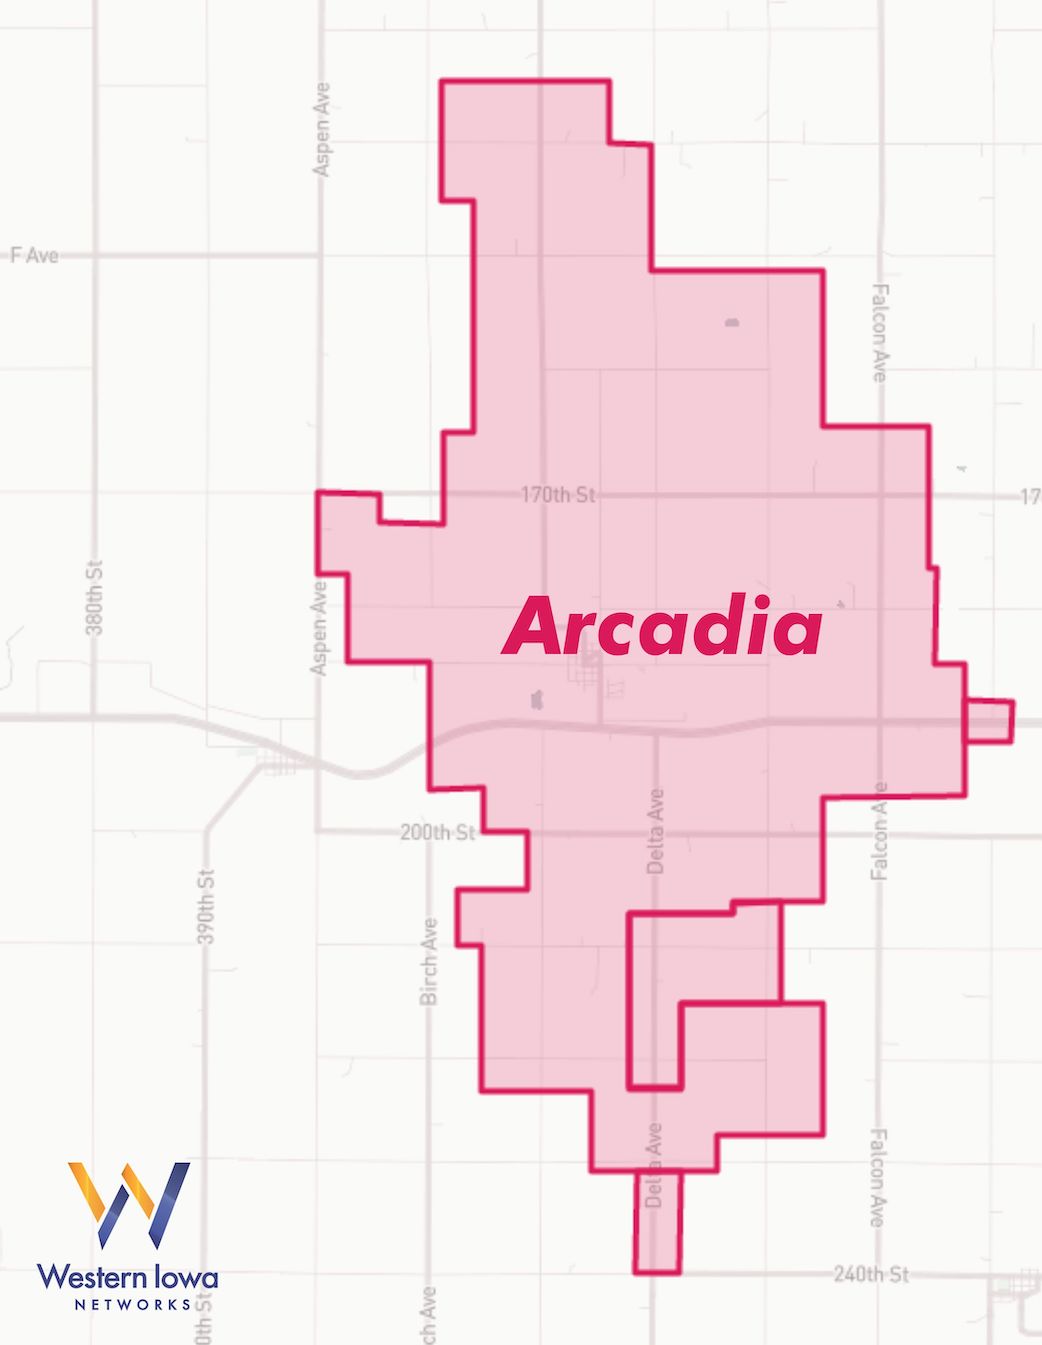 Arcadia Map - Download Images to View